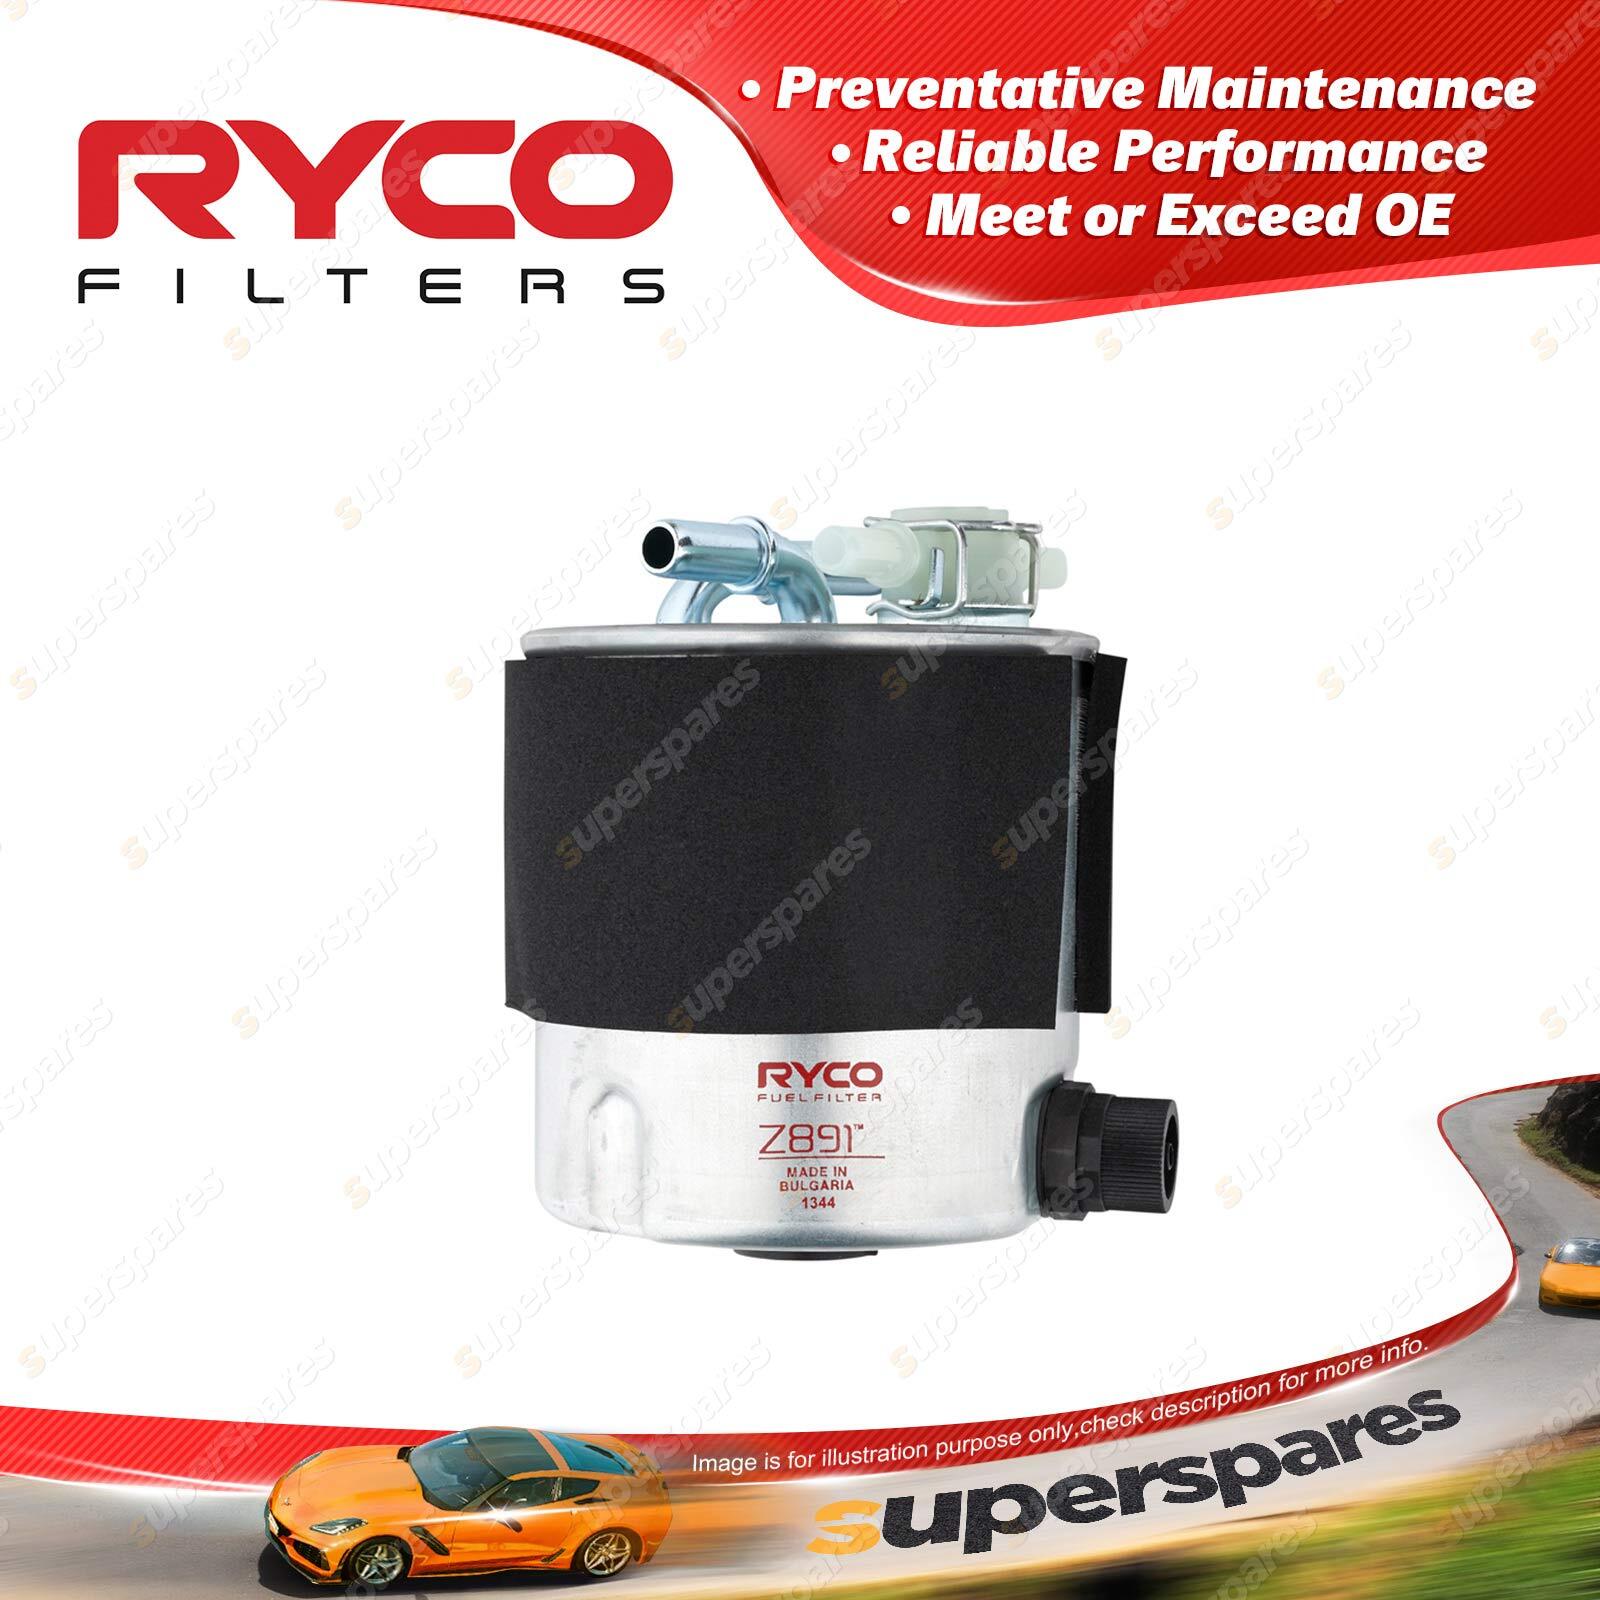 1pc Ryco Fuel Filter for Nissan XTrail T31 Turbo Diesel